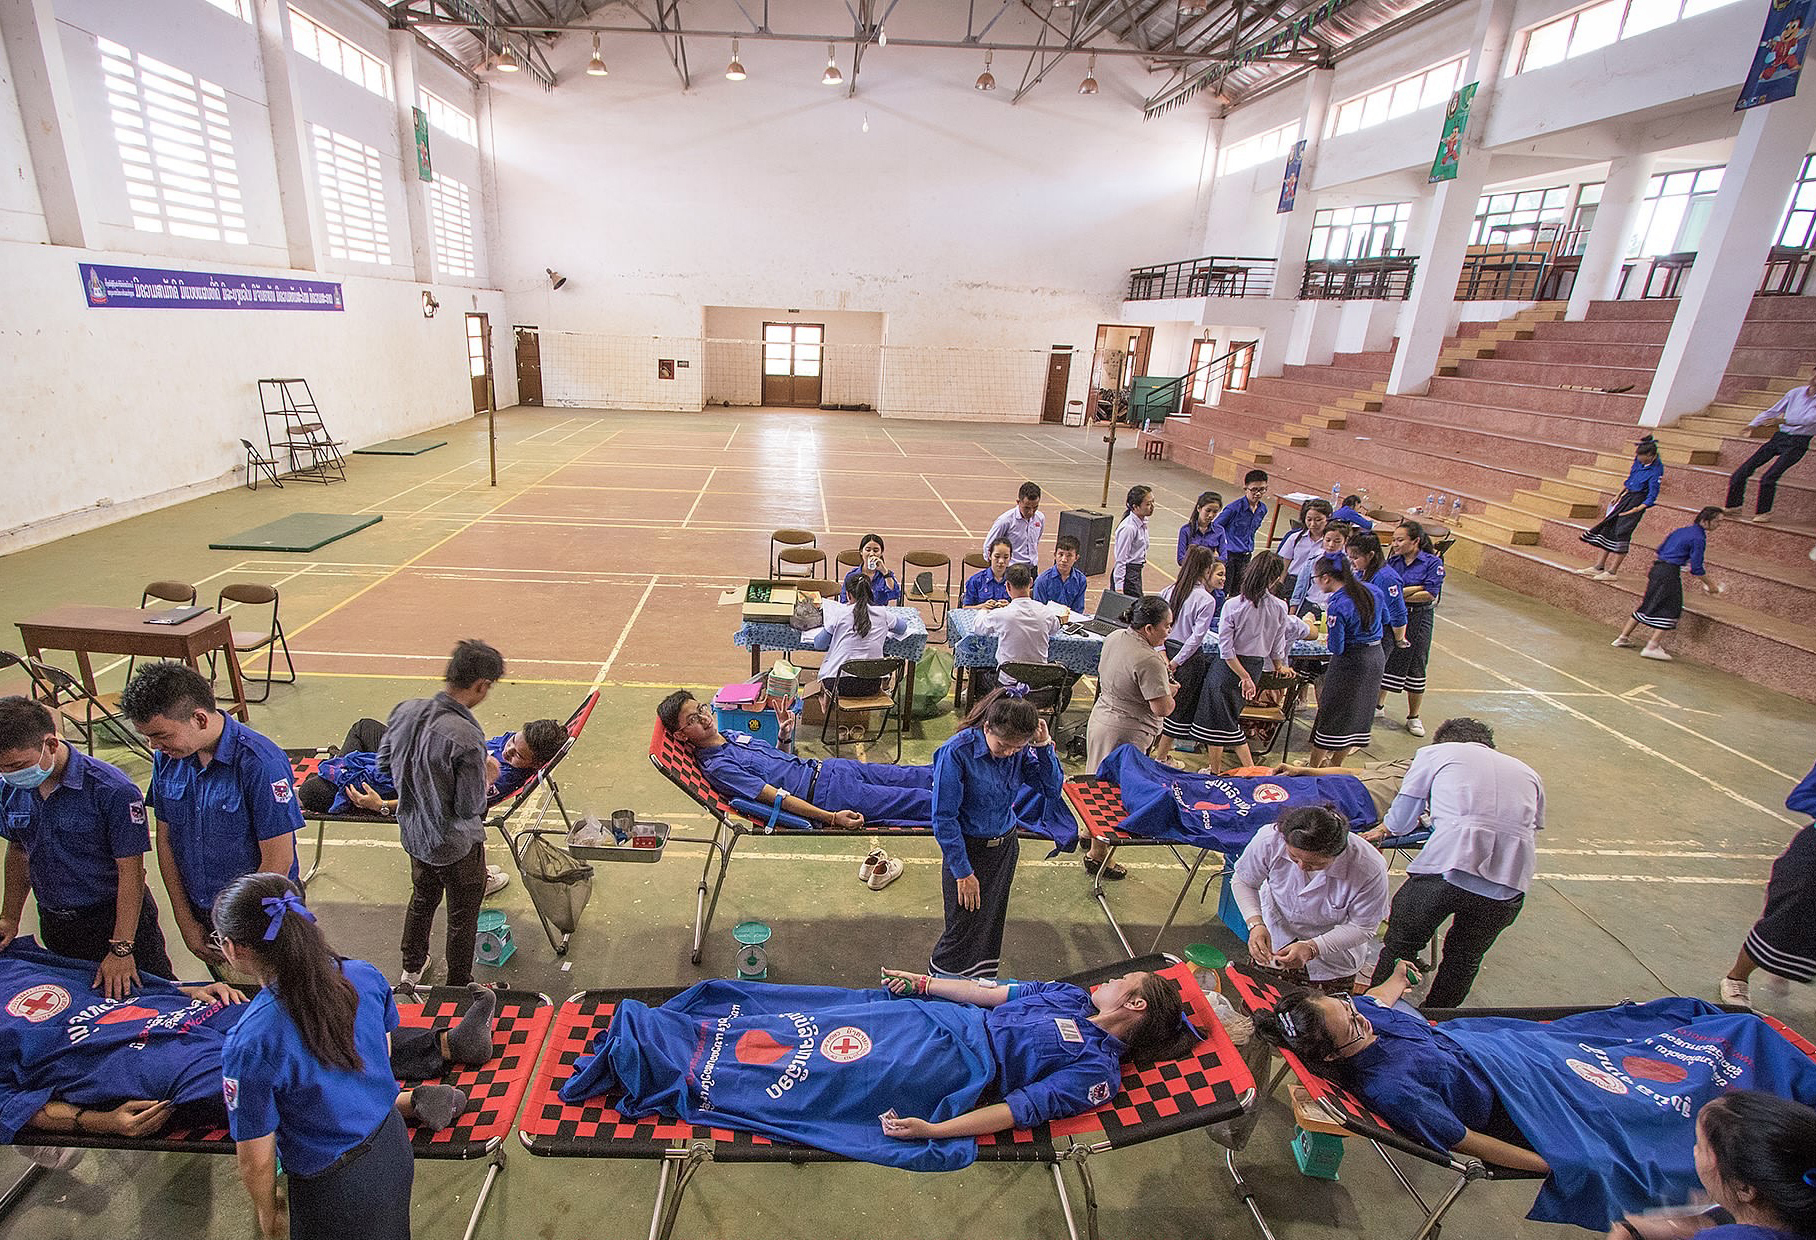 Blood Donation Drive to Mark International Volunteer Day Sees Large Turnout of Donors